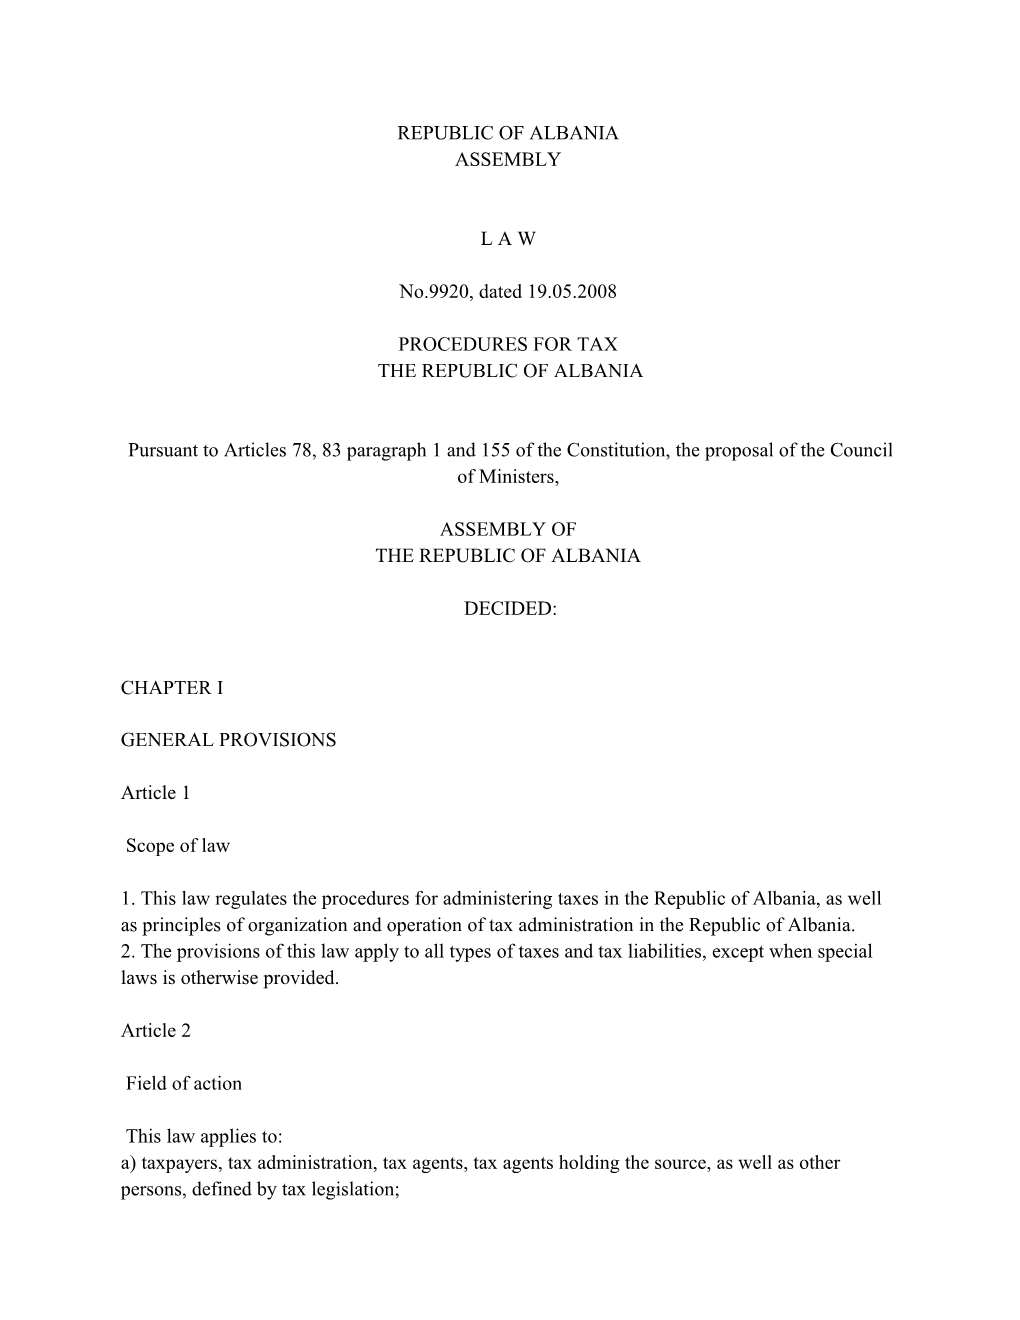 REPUBLIC of ALBANIA ASSEMBLY L a W No.9920, Dated 19.05.2008 PROCEDURES for TAX the REPUBLIC